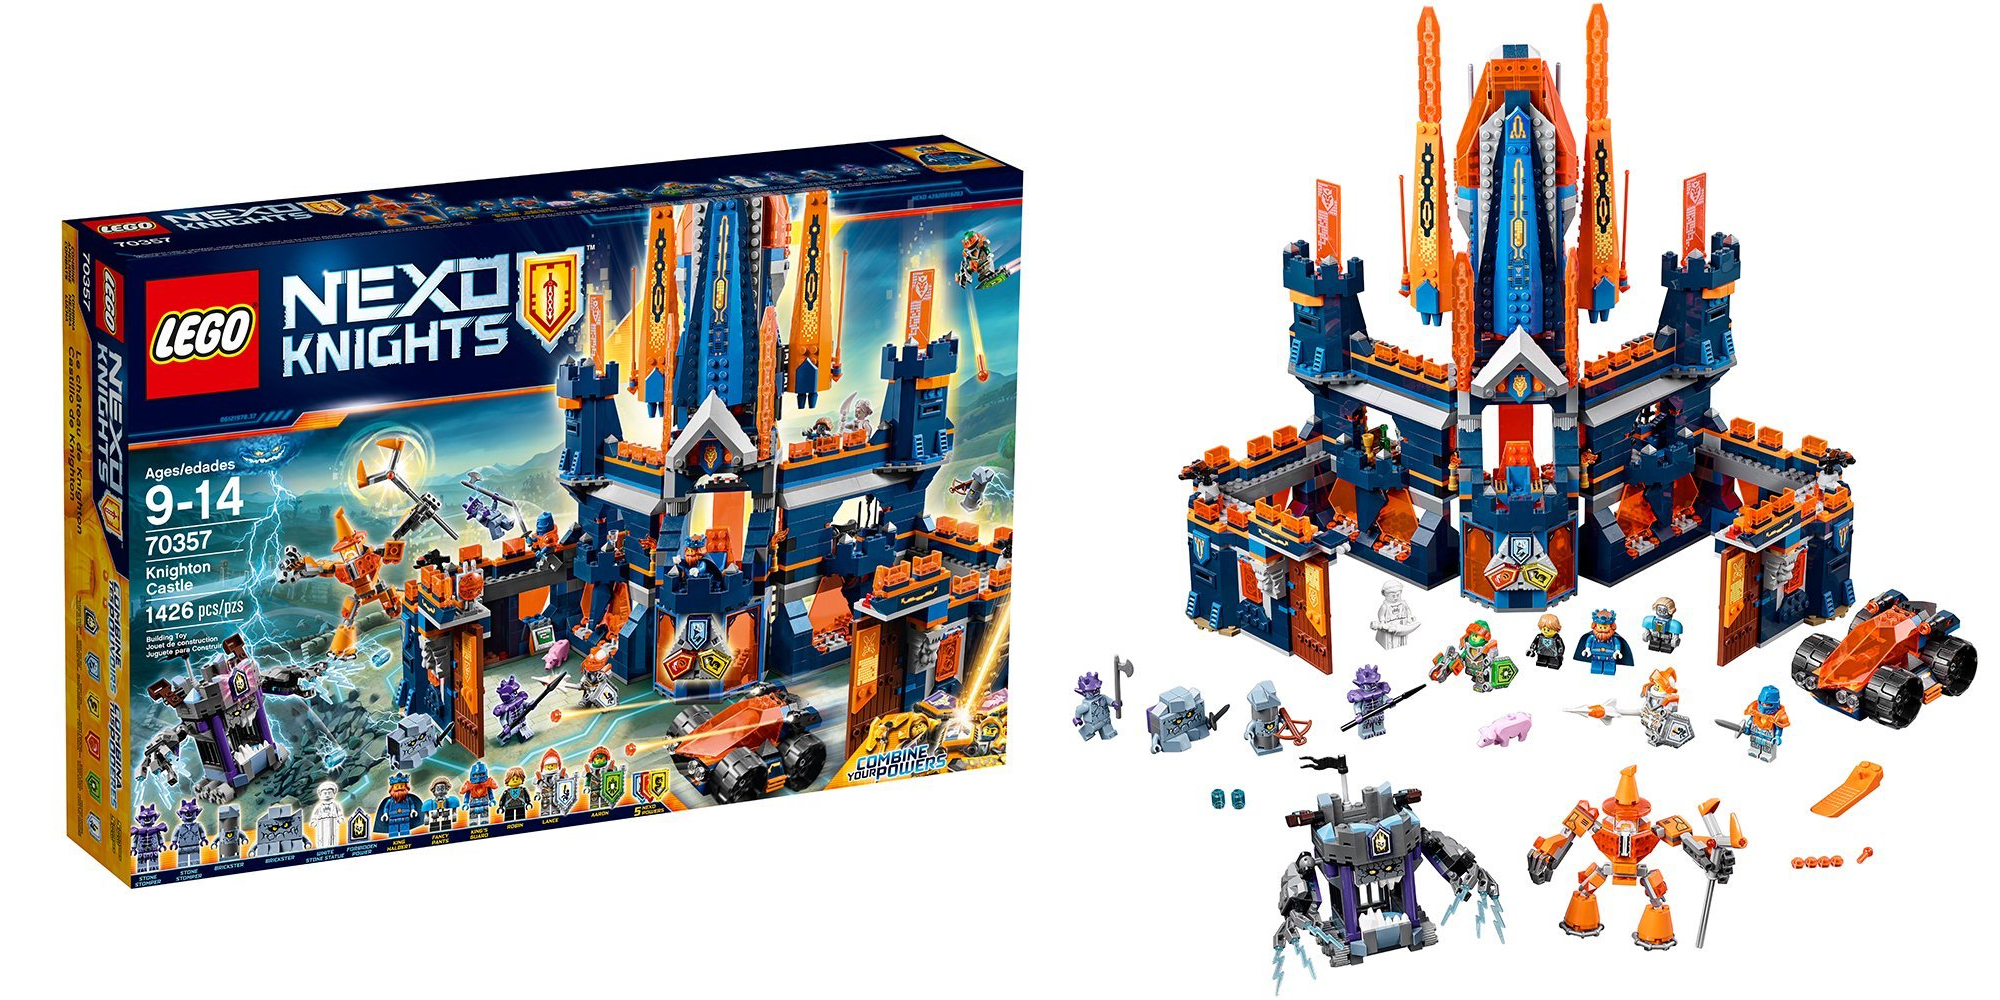 This 1,400-piece LEGO Nexo Knights Castle set to new at shipped (50% off)